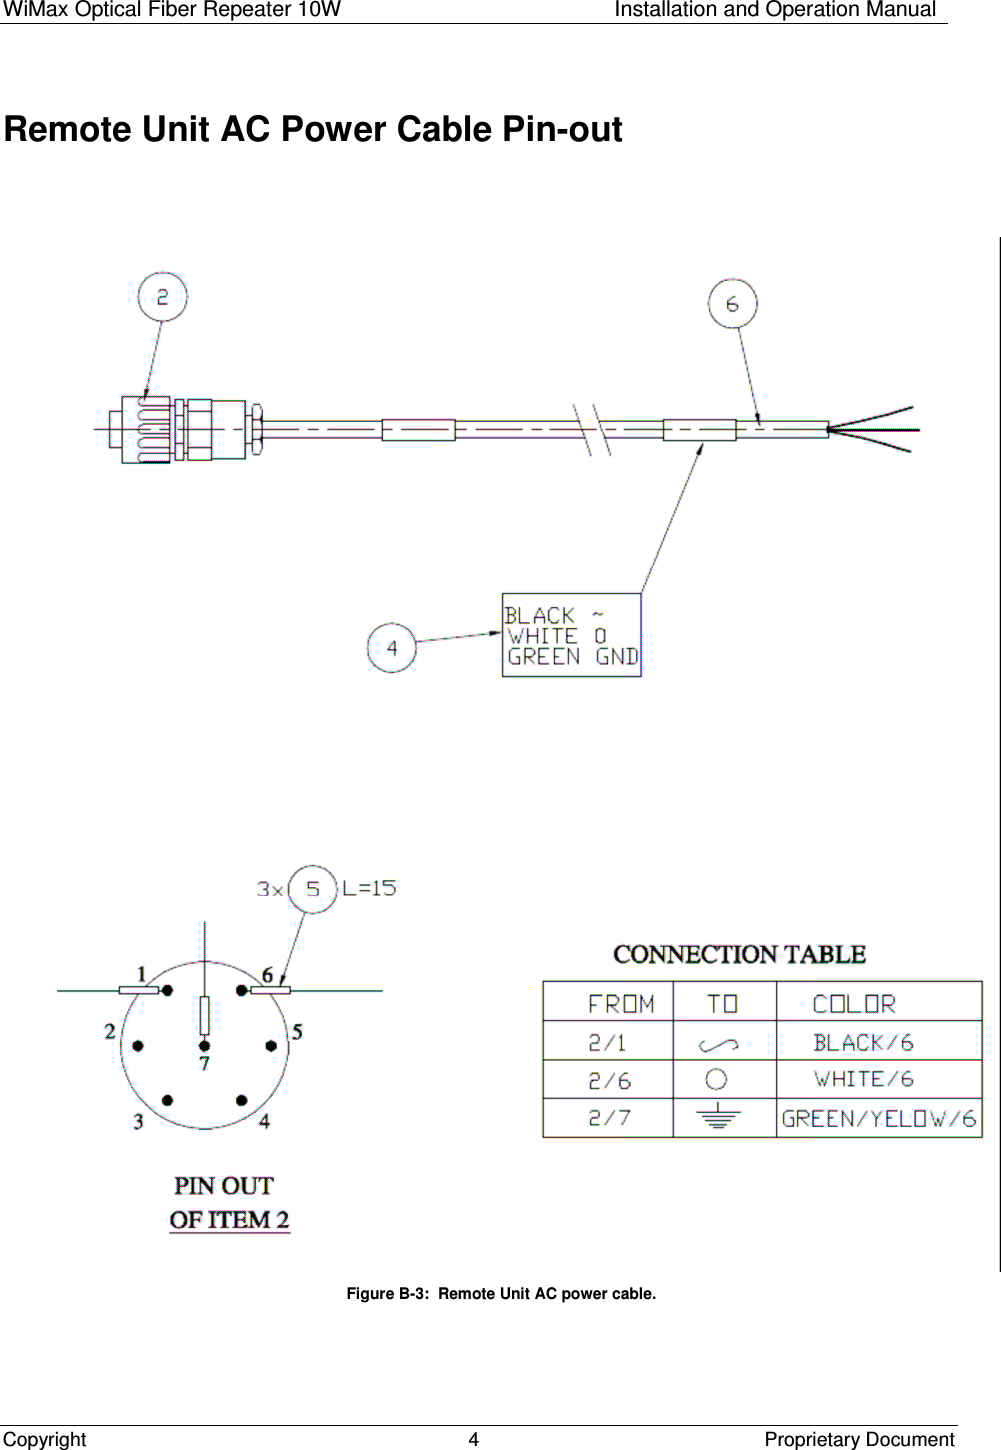 WiMax Optical Fiber Repeater 10W   Installation and Operation Manual Copyright    Proprietary Document  4   Remote Unit AC Power Cable Pin-out    Figure B-3:  Remote Unit AC power cable.